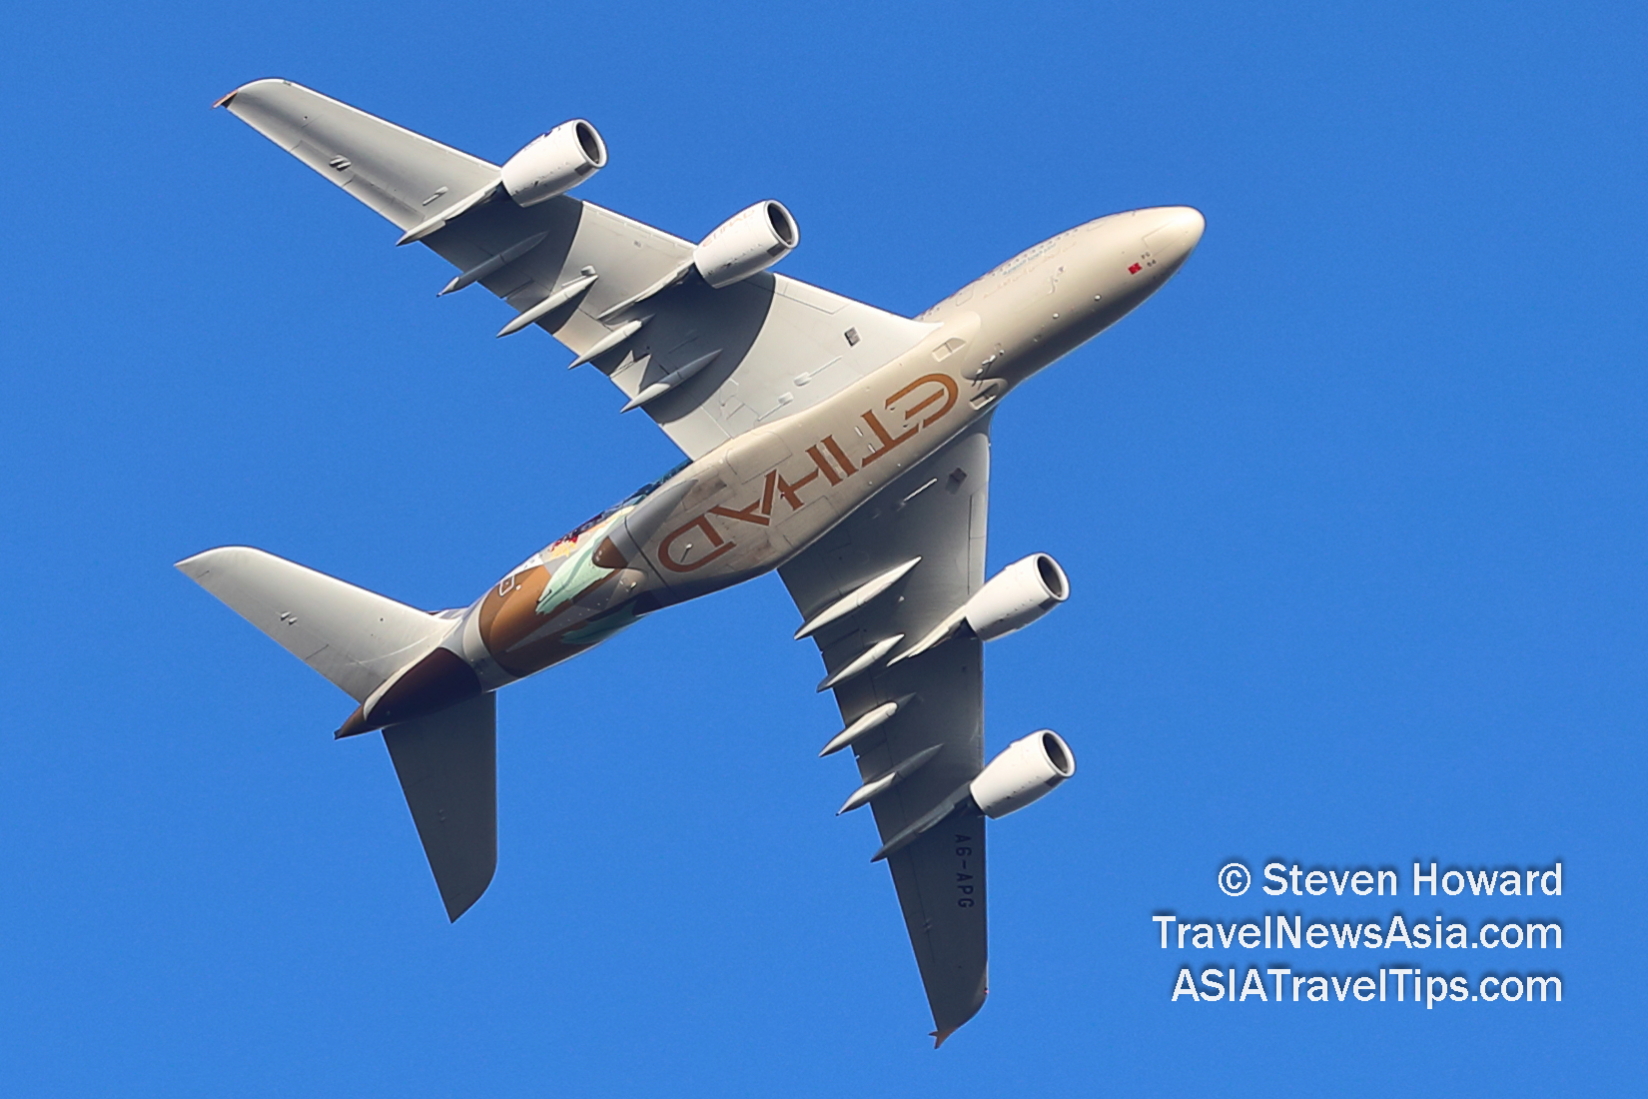 Etihad Airways A380 reg: A6-APG. Picture by Steven Howard of TravelNewsAsia.com Click to enlarge.